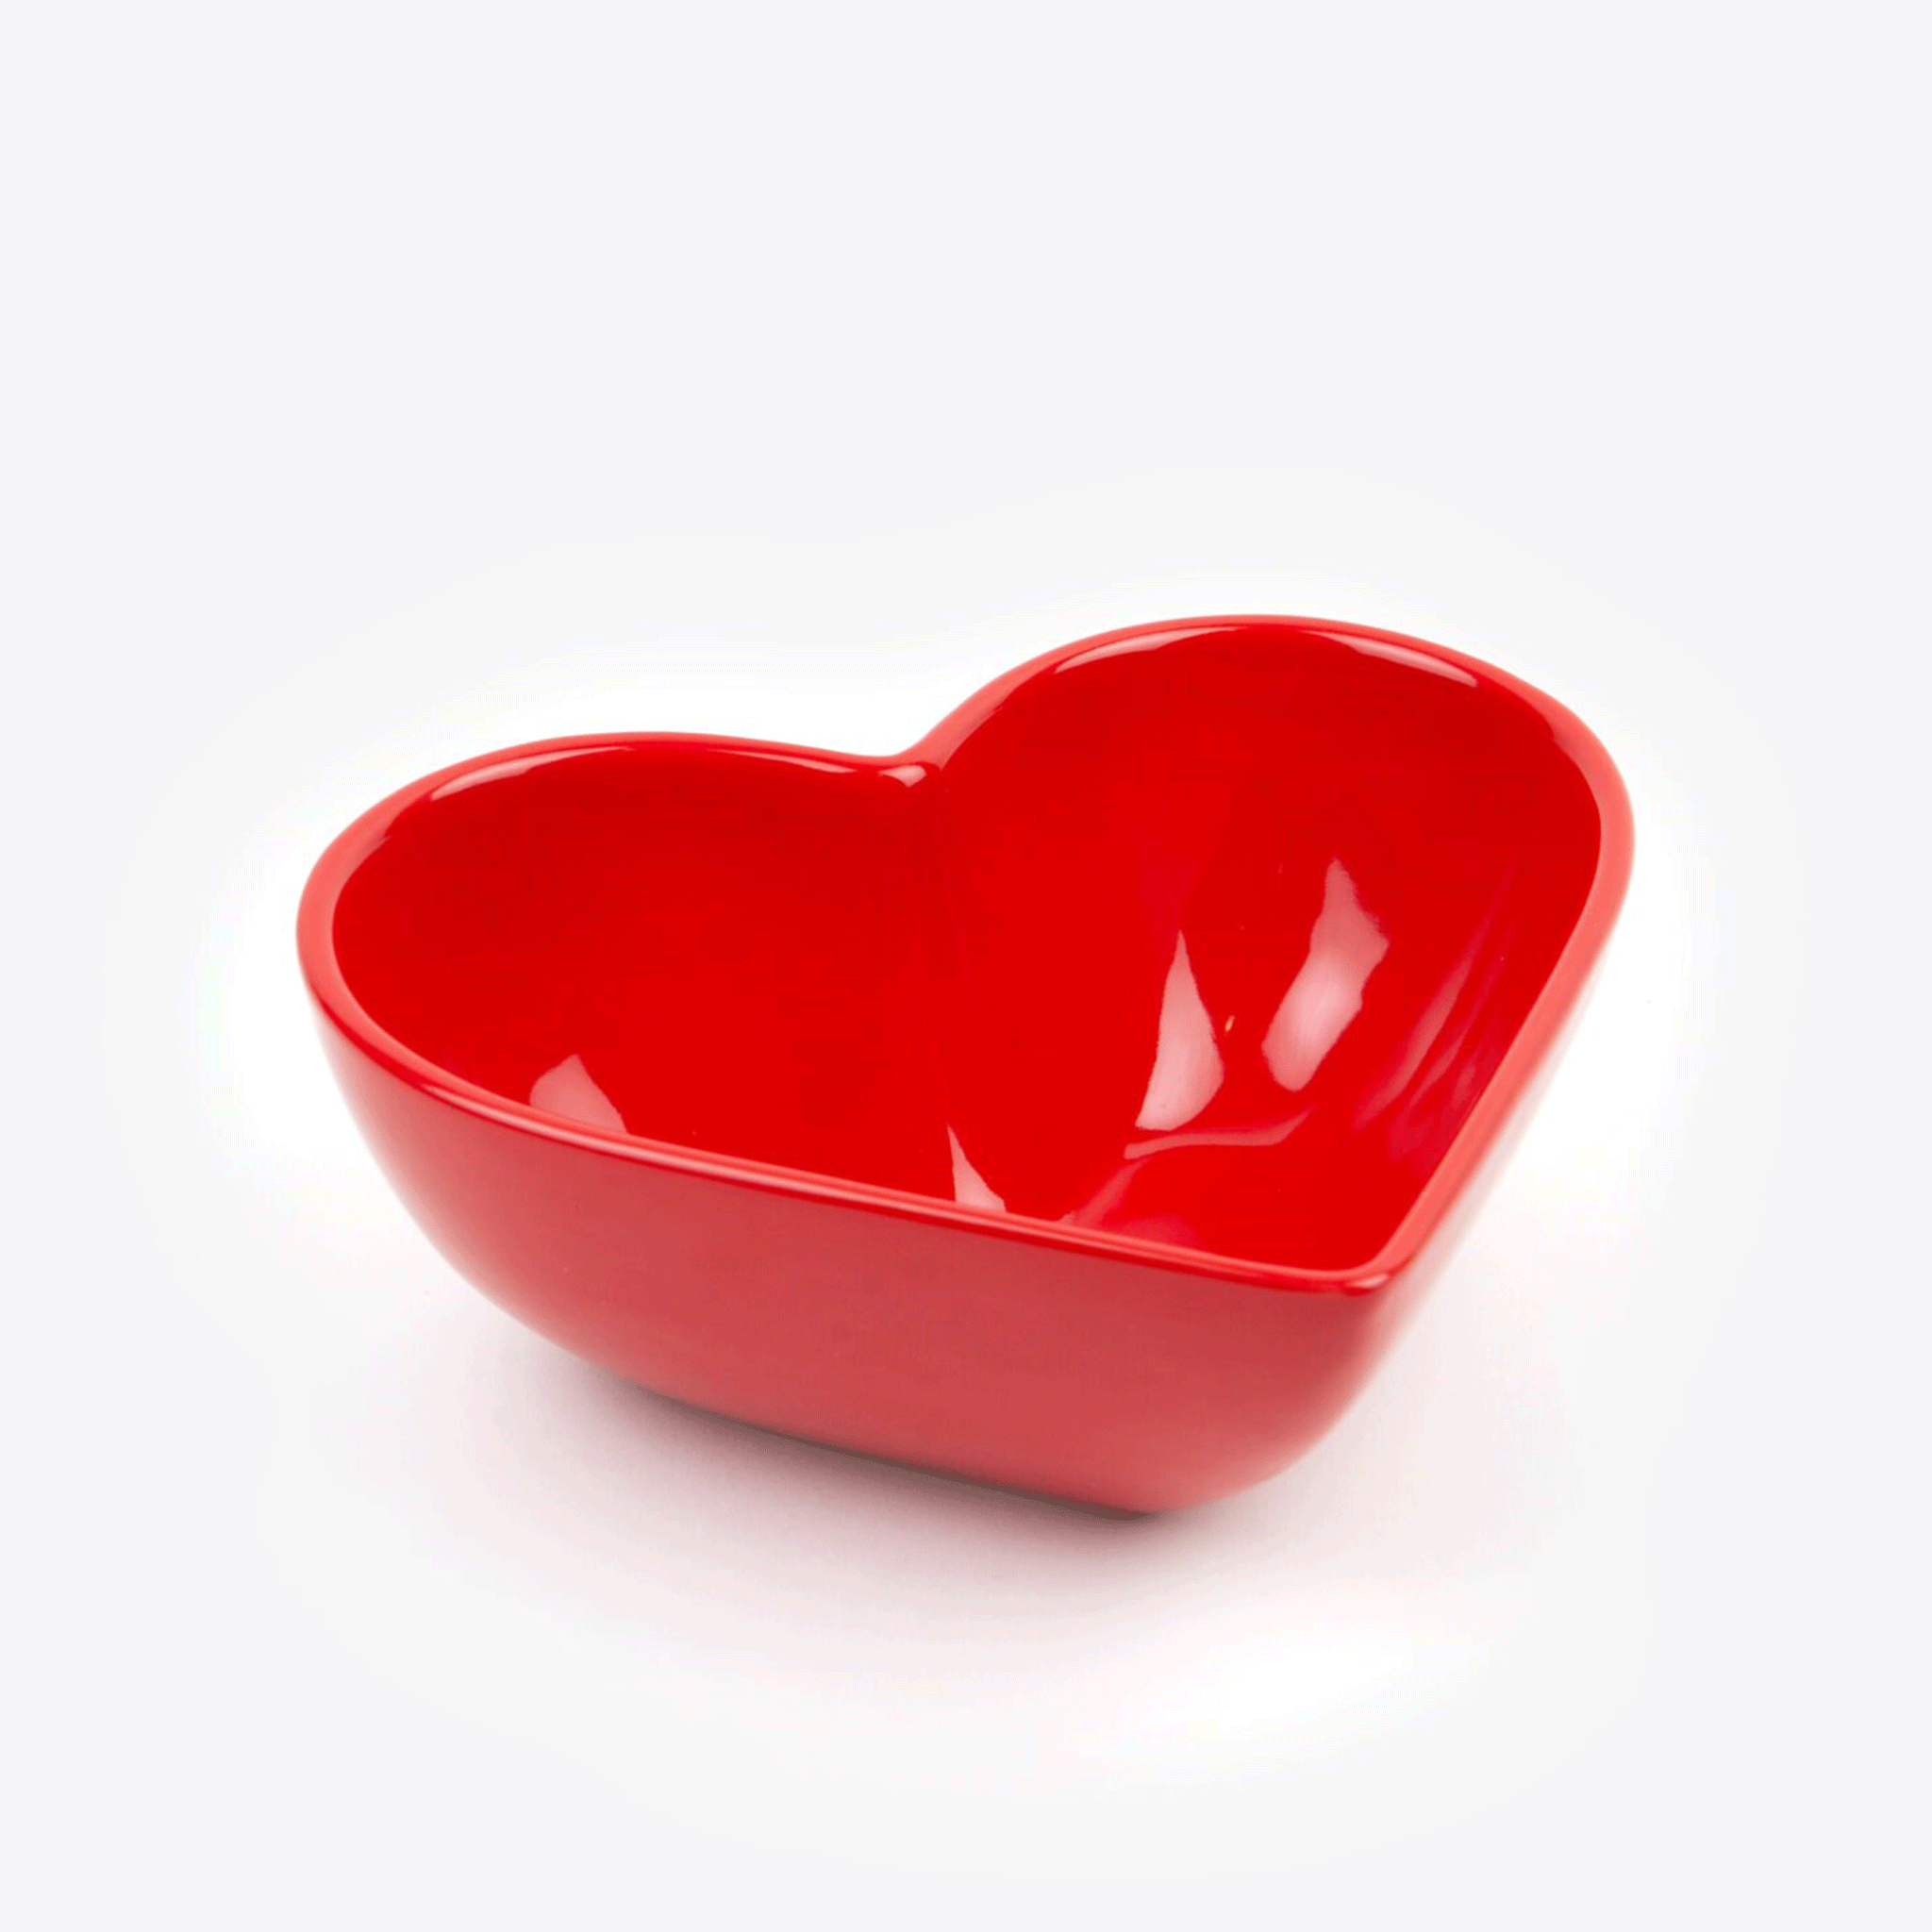 A red ceramic heart shaped bowl. 